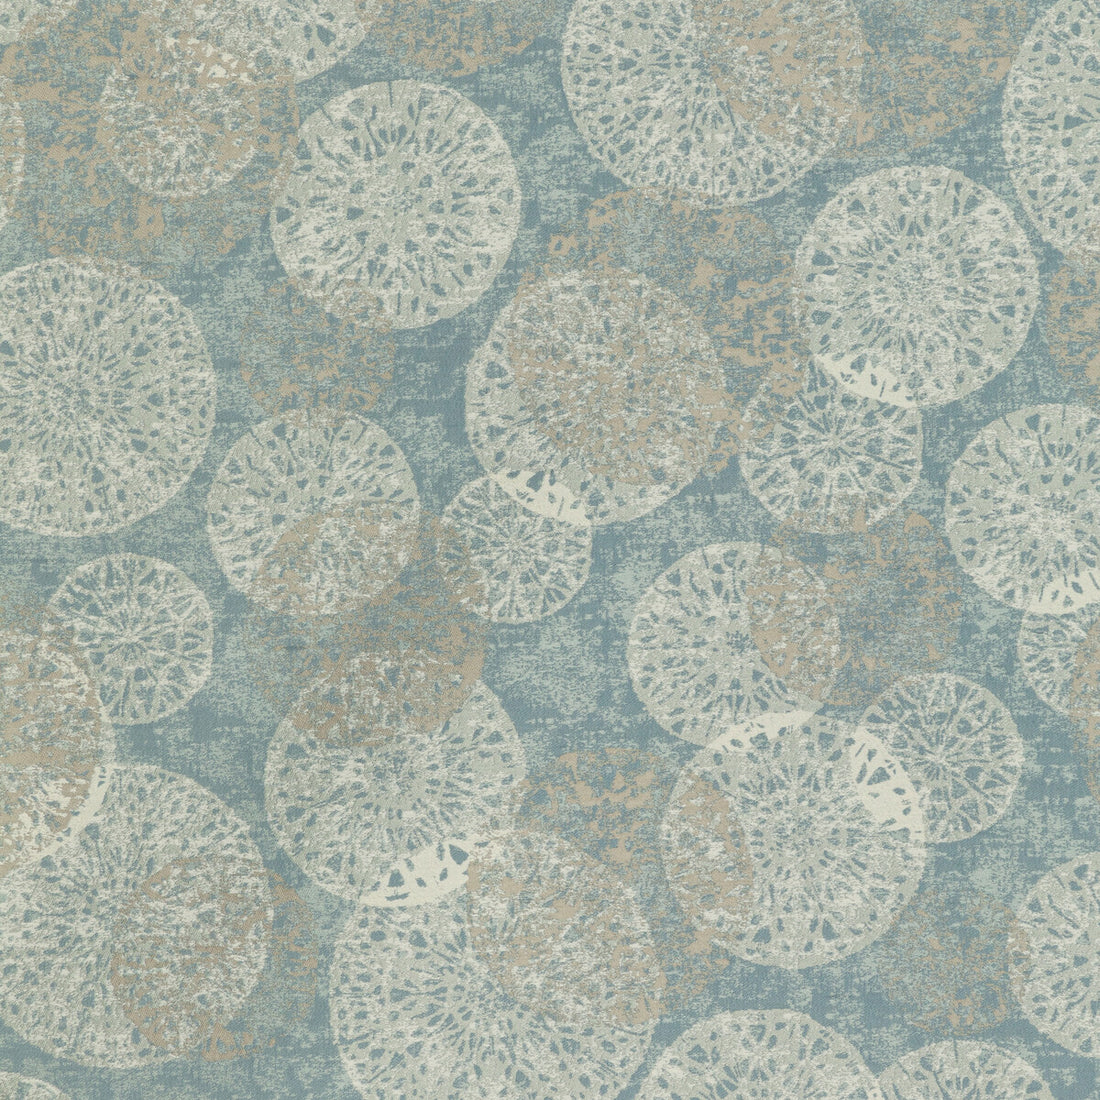 Ringsend fabric in spa color - pattern 36059.23.0 - by Kravet Basics in the Monterey collection